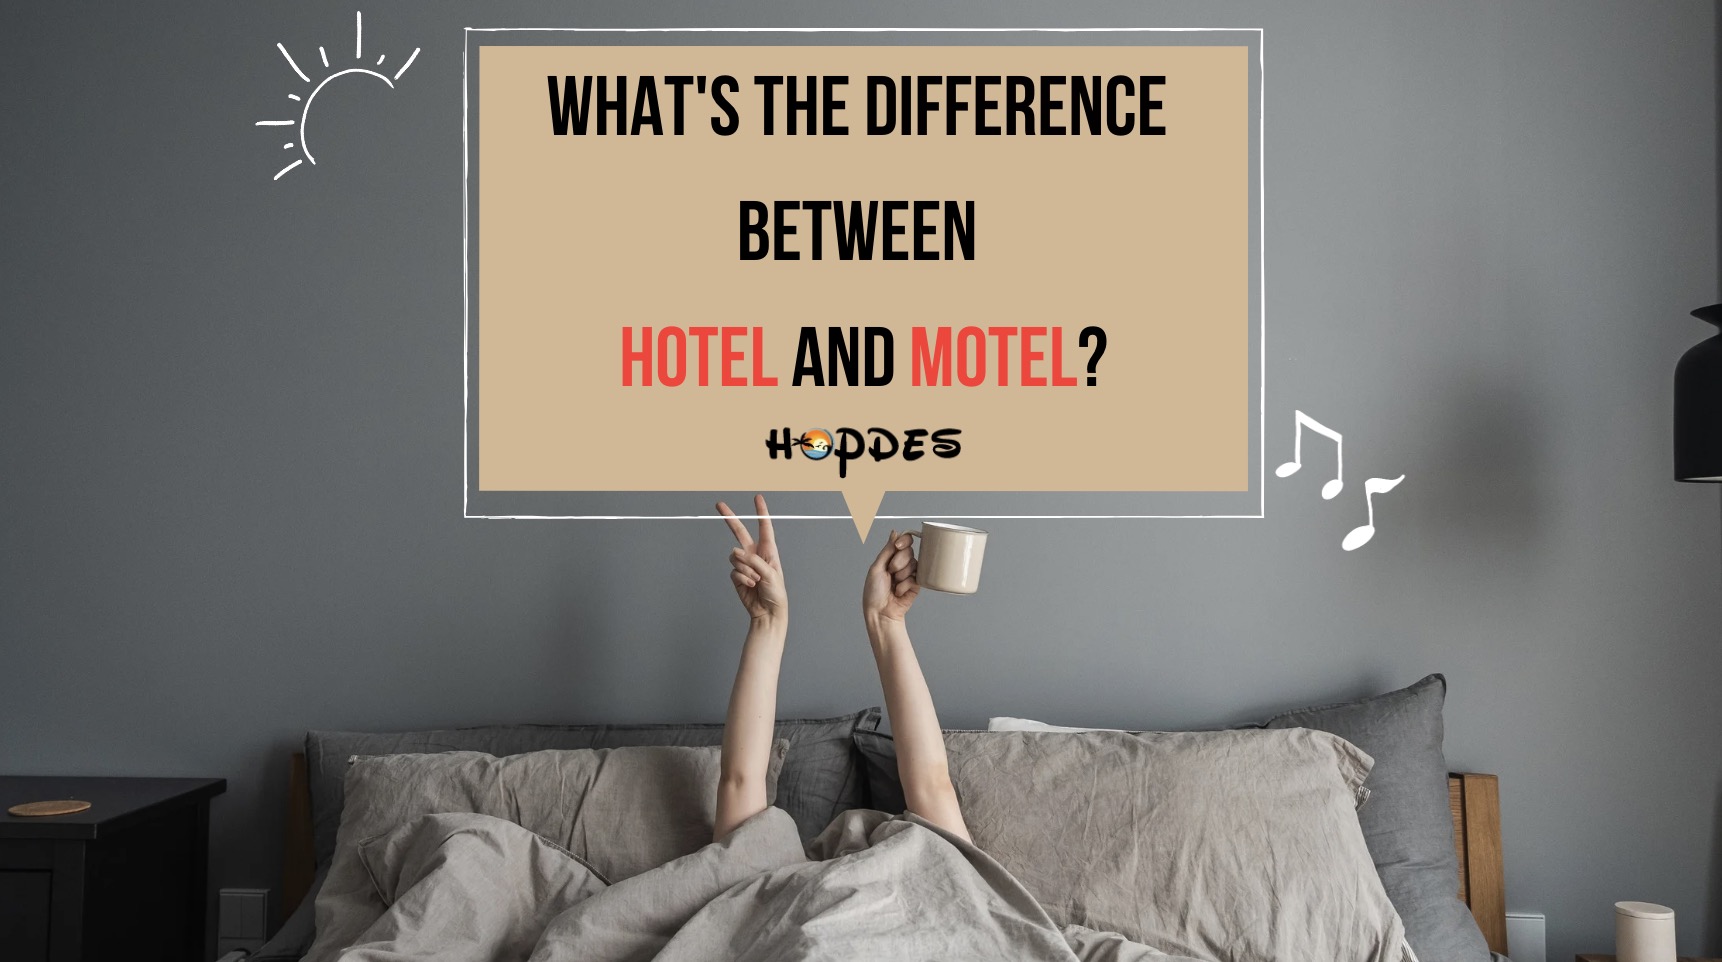 What's the Difference Between Hotel and Motel?